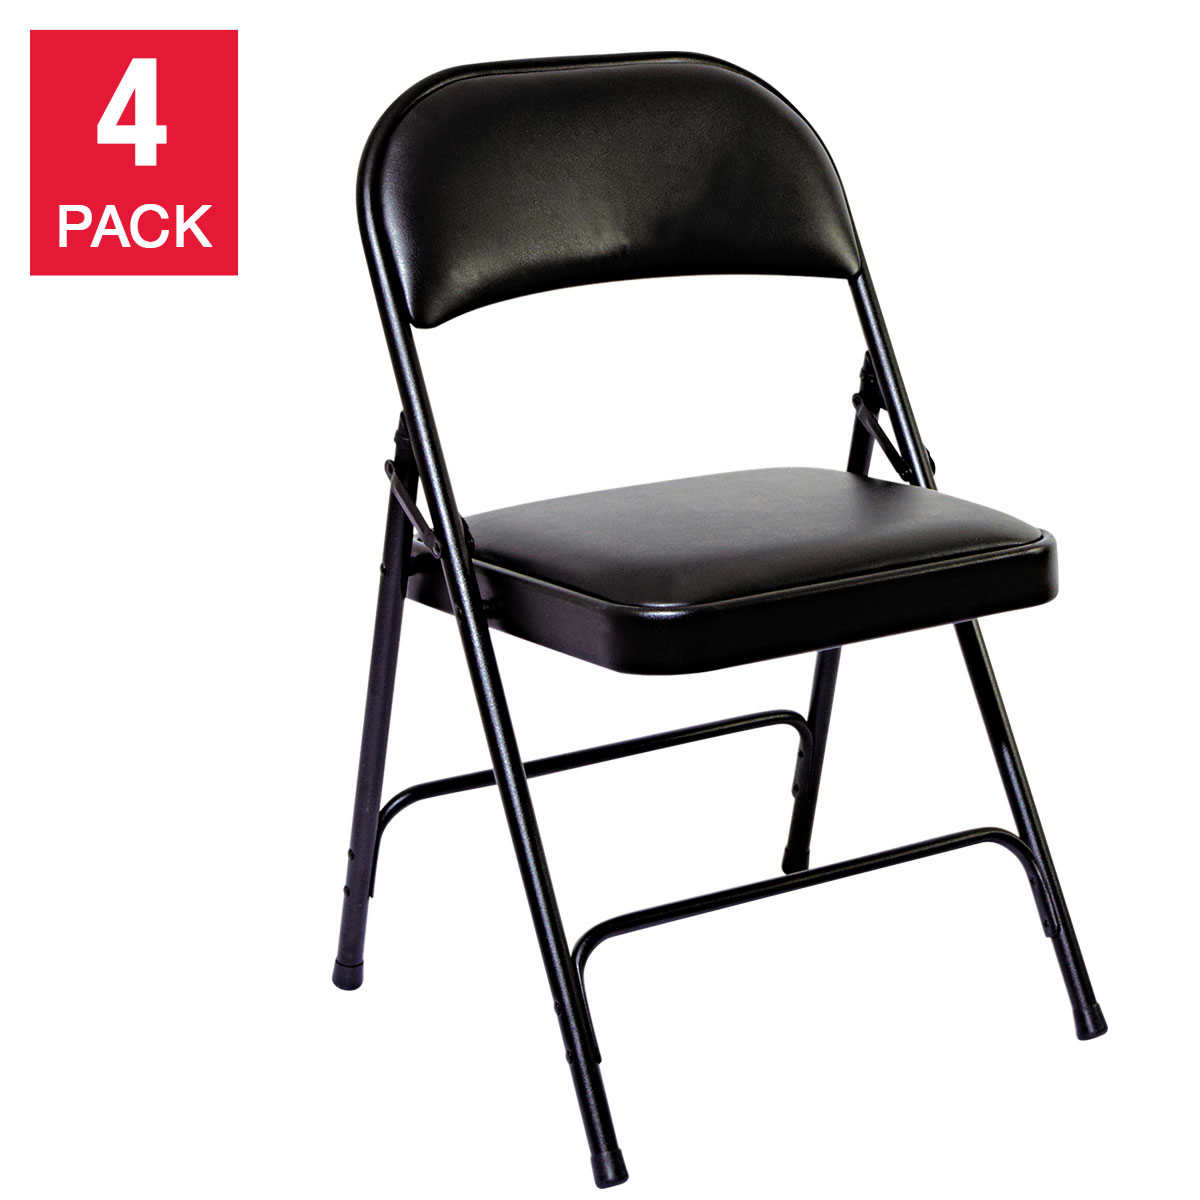 cushioned folding chairs best price